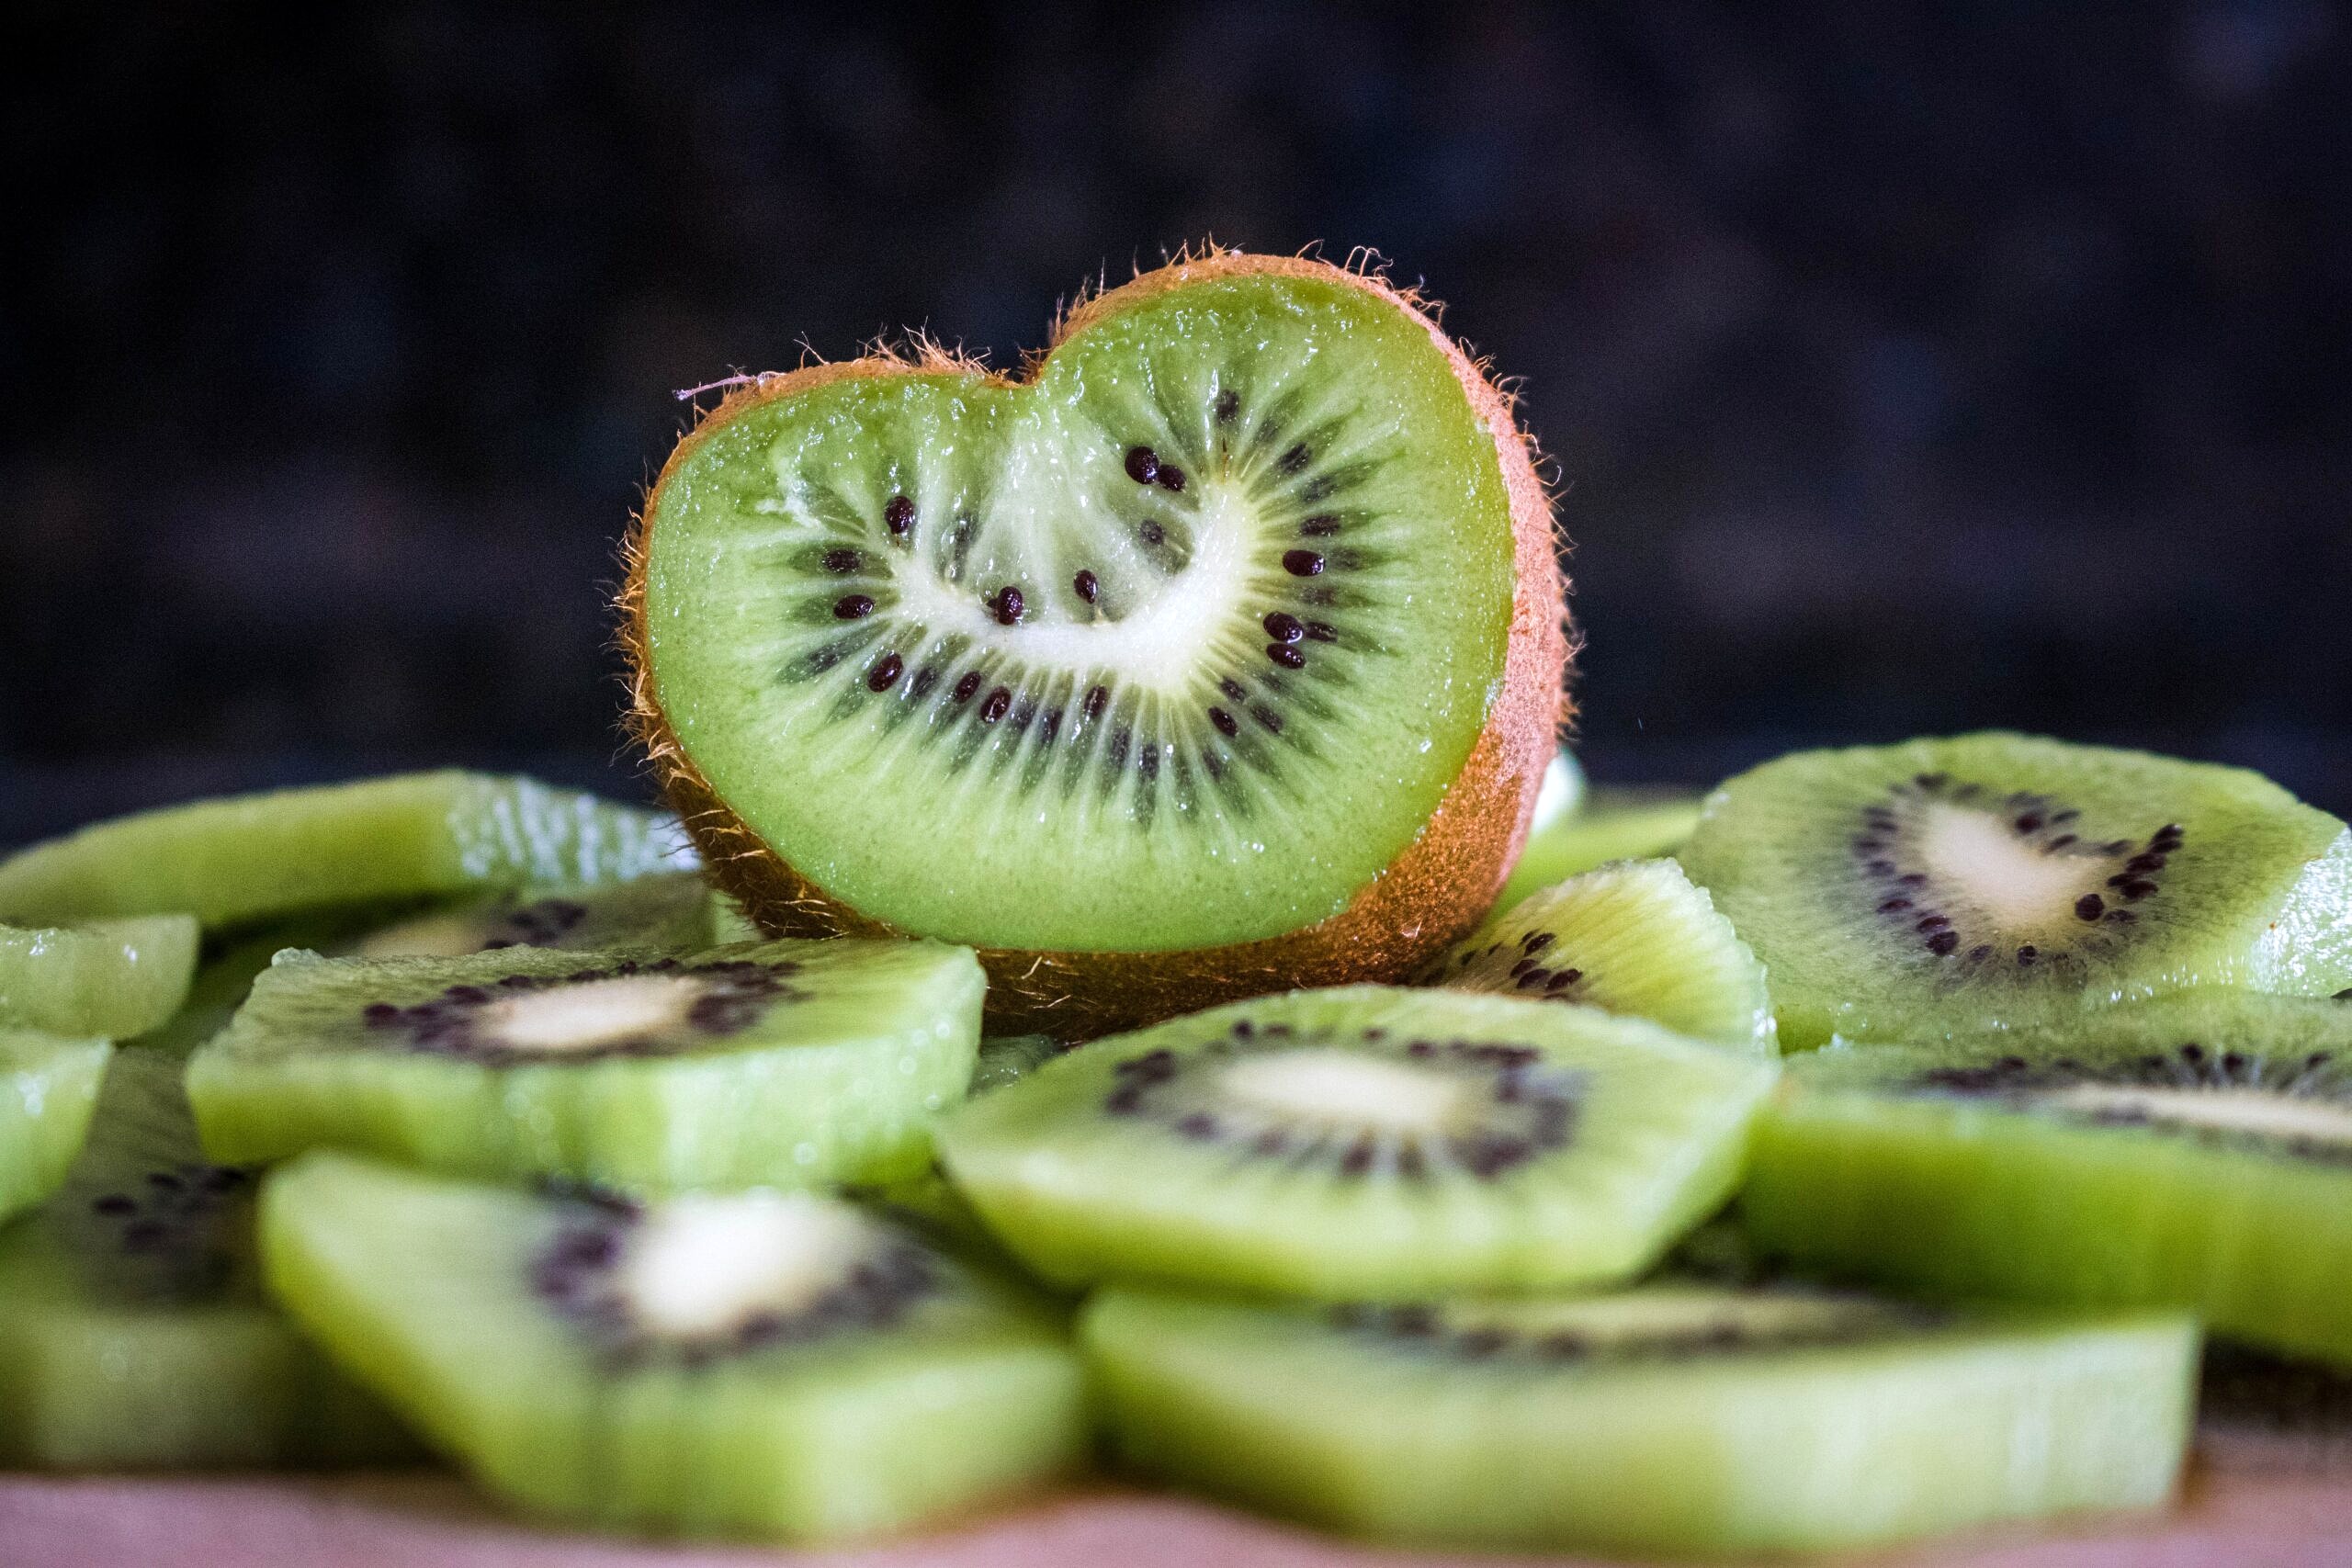 Close up of kiwis on a plate.